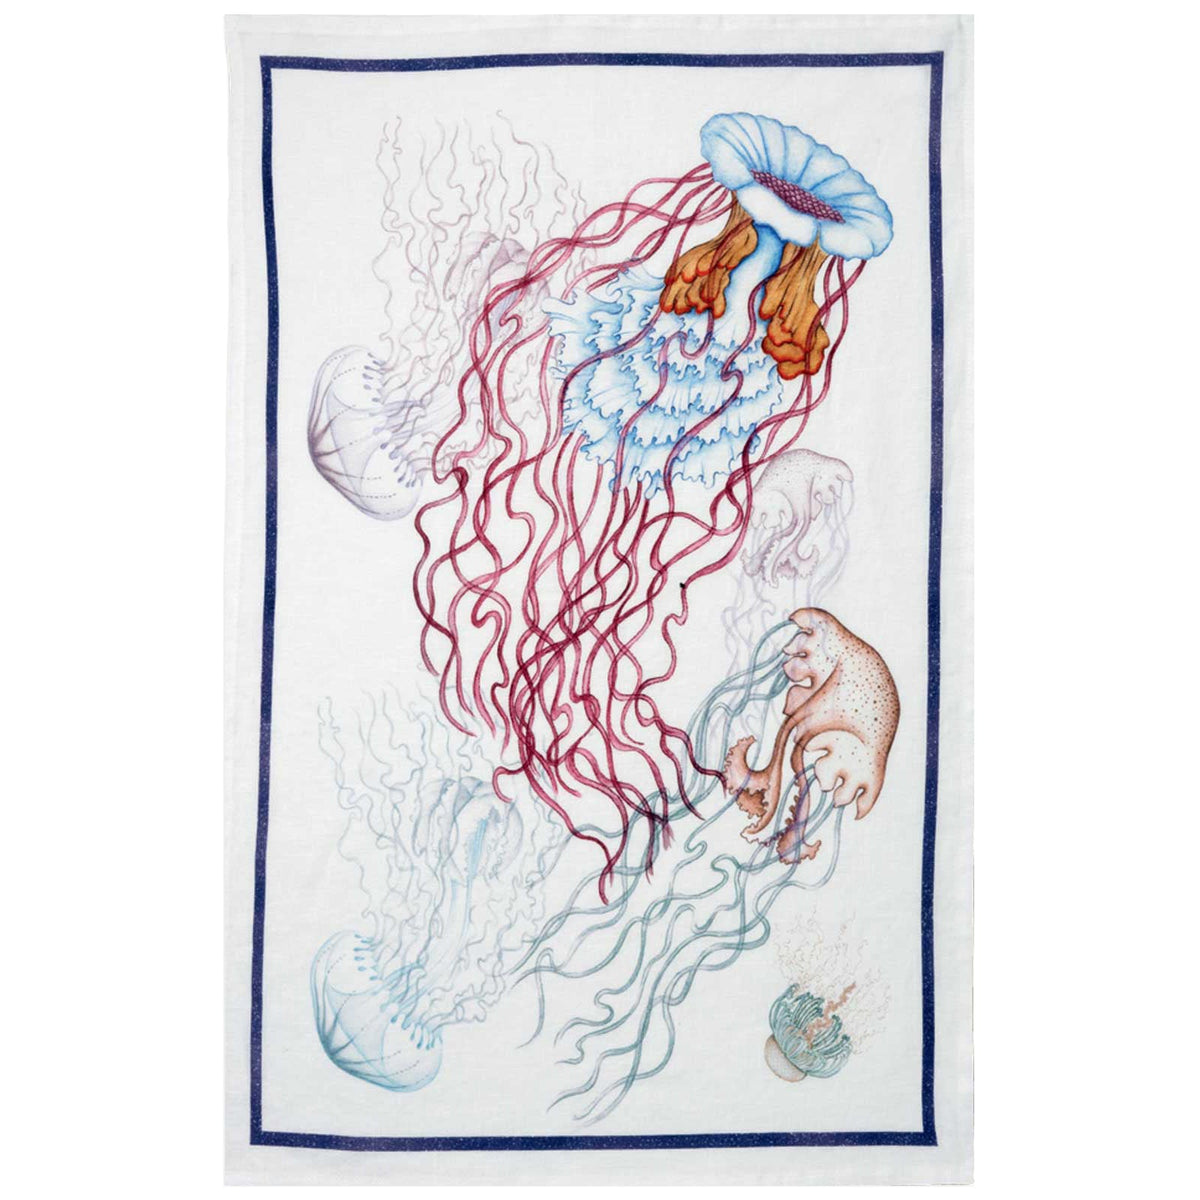 A Reef Linen Kitchen Towels Set/2 by TTT, with a jellyfish, one of the deep-sea dwellers, printed on it. This tea towel is made with premium quality fabric from an Italian mill.